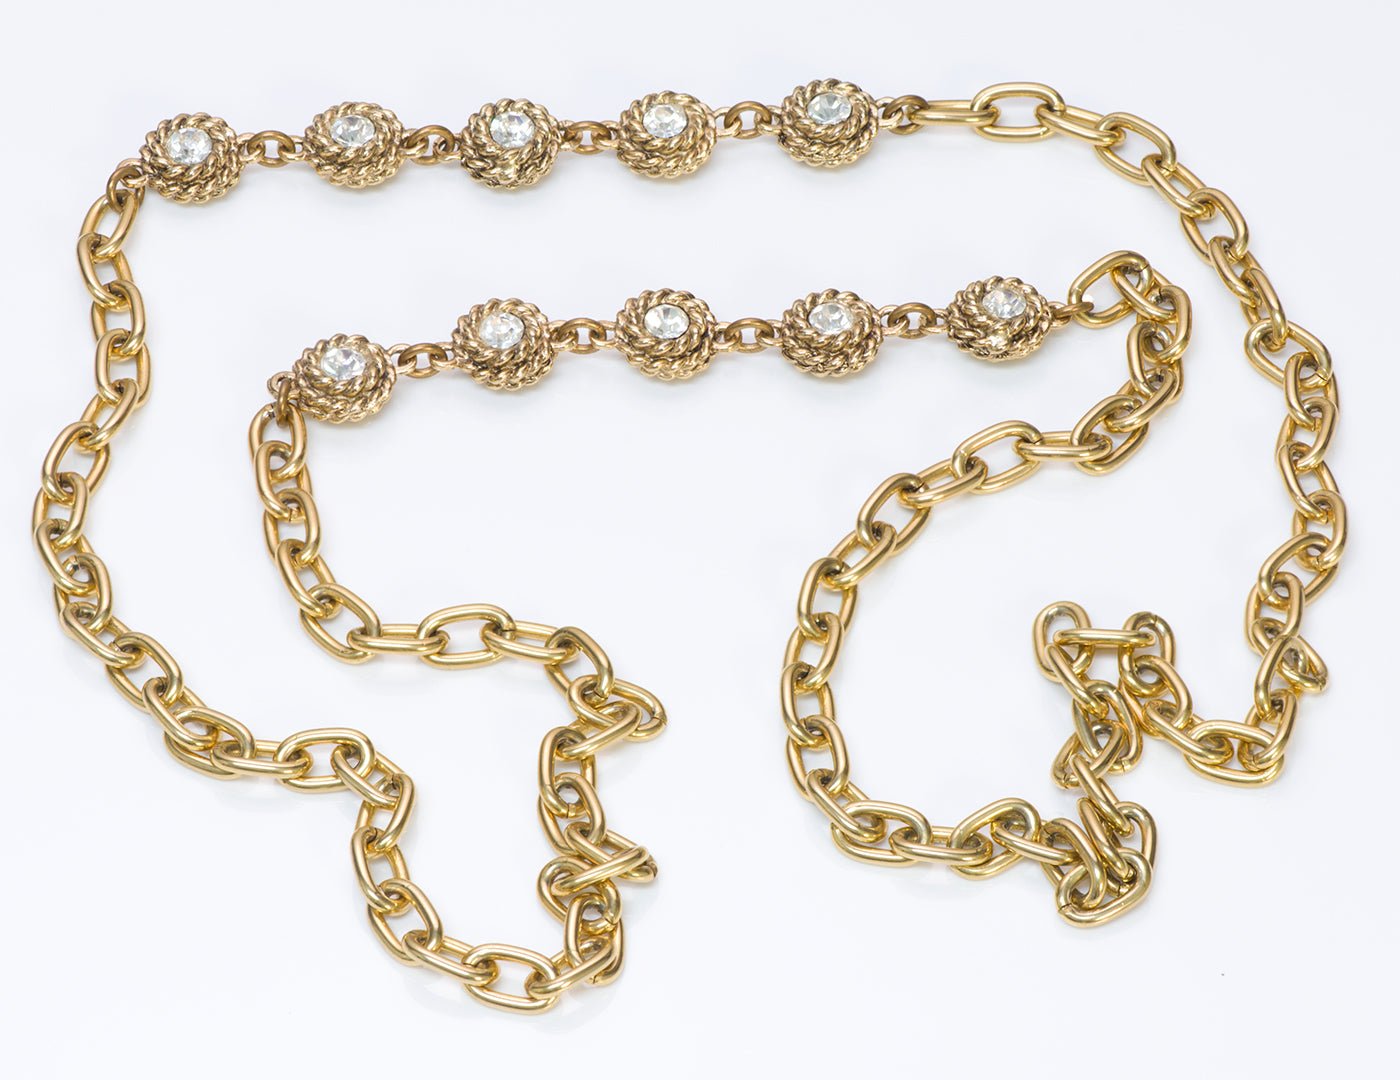 Chanel 1980’s Gold Tone Chain Camellia Crystal Necklace - DSF Antique Jewelry